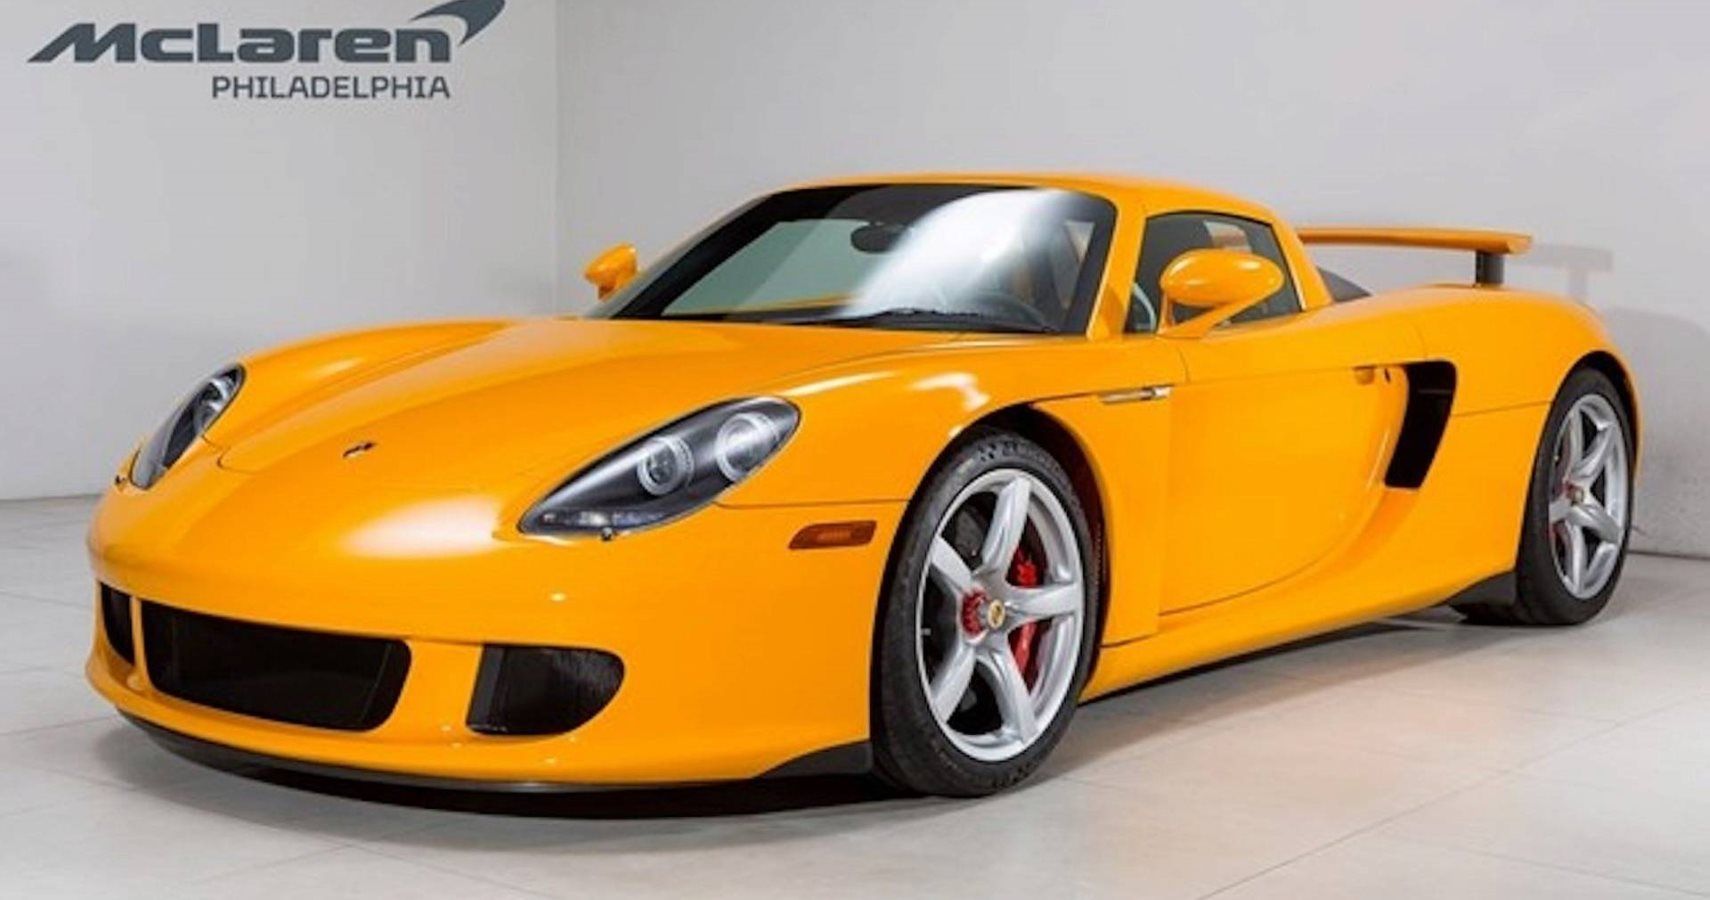 Porsche Carrera Gt Signal Yellow Special Model Goes On Sale